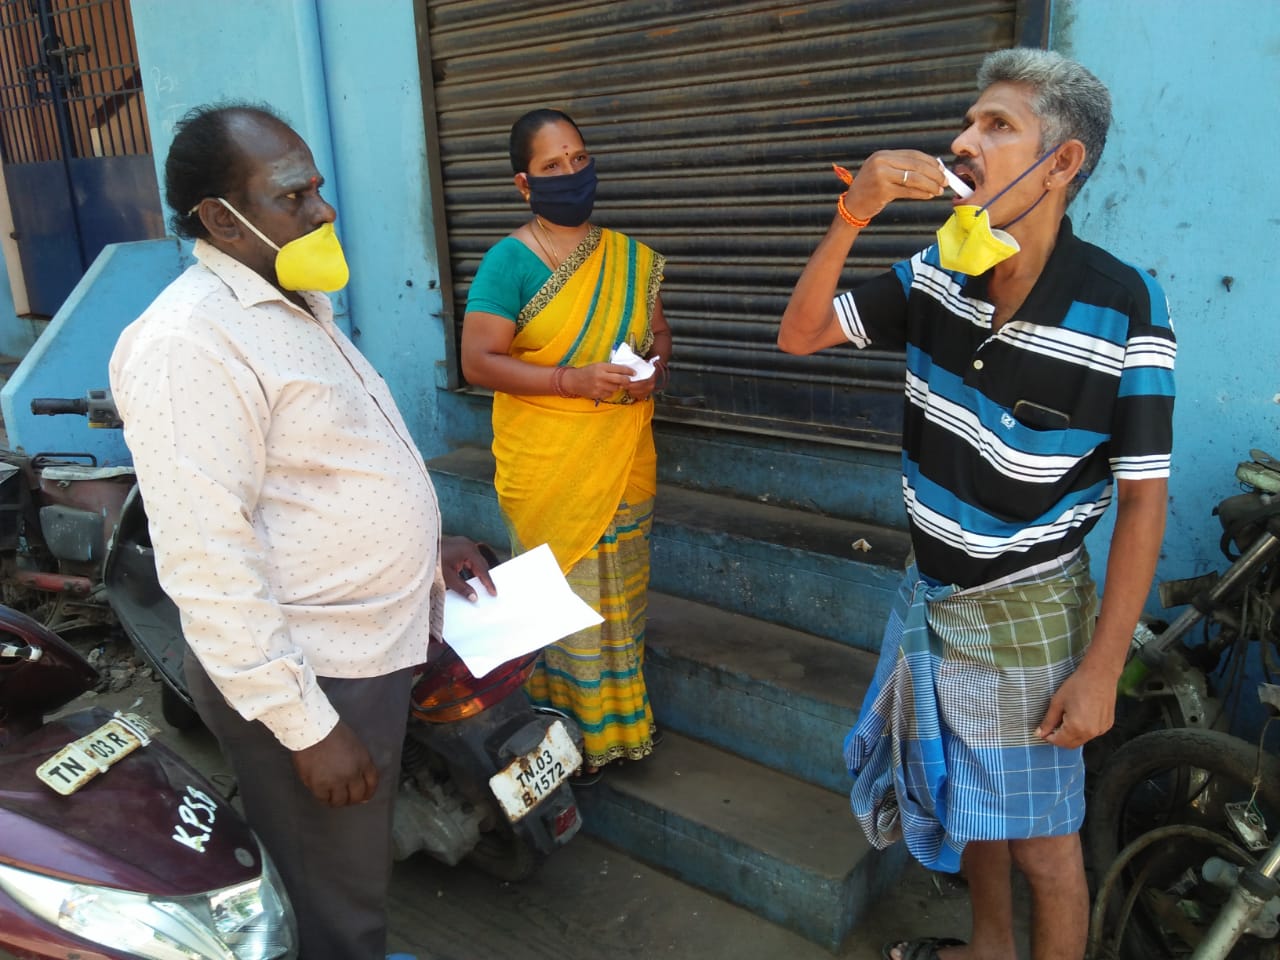 OST medicines being distributed to community members in Chennai.